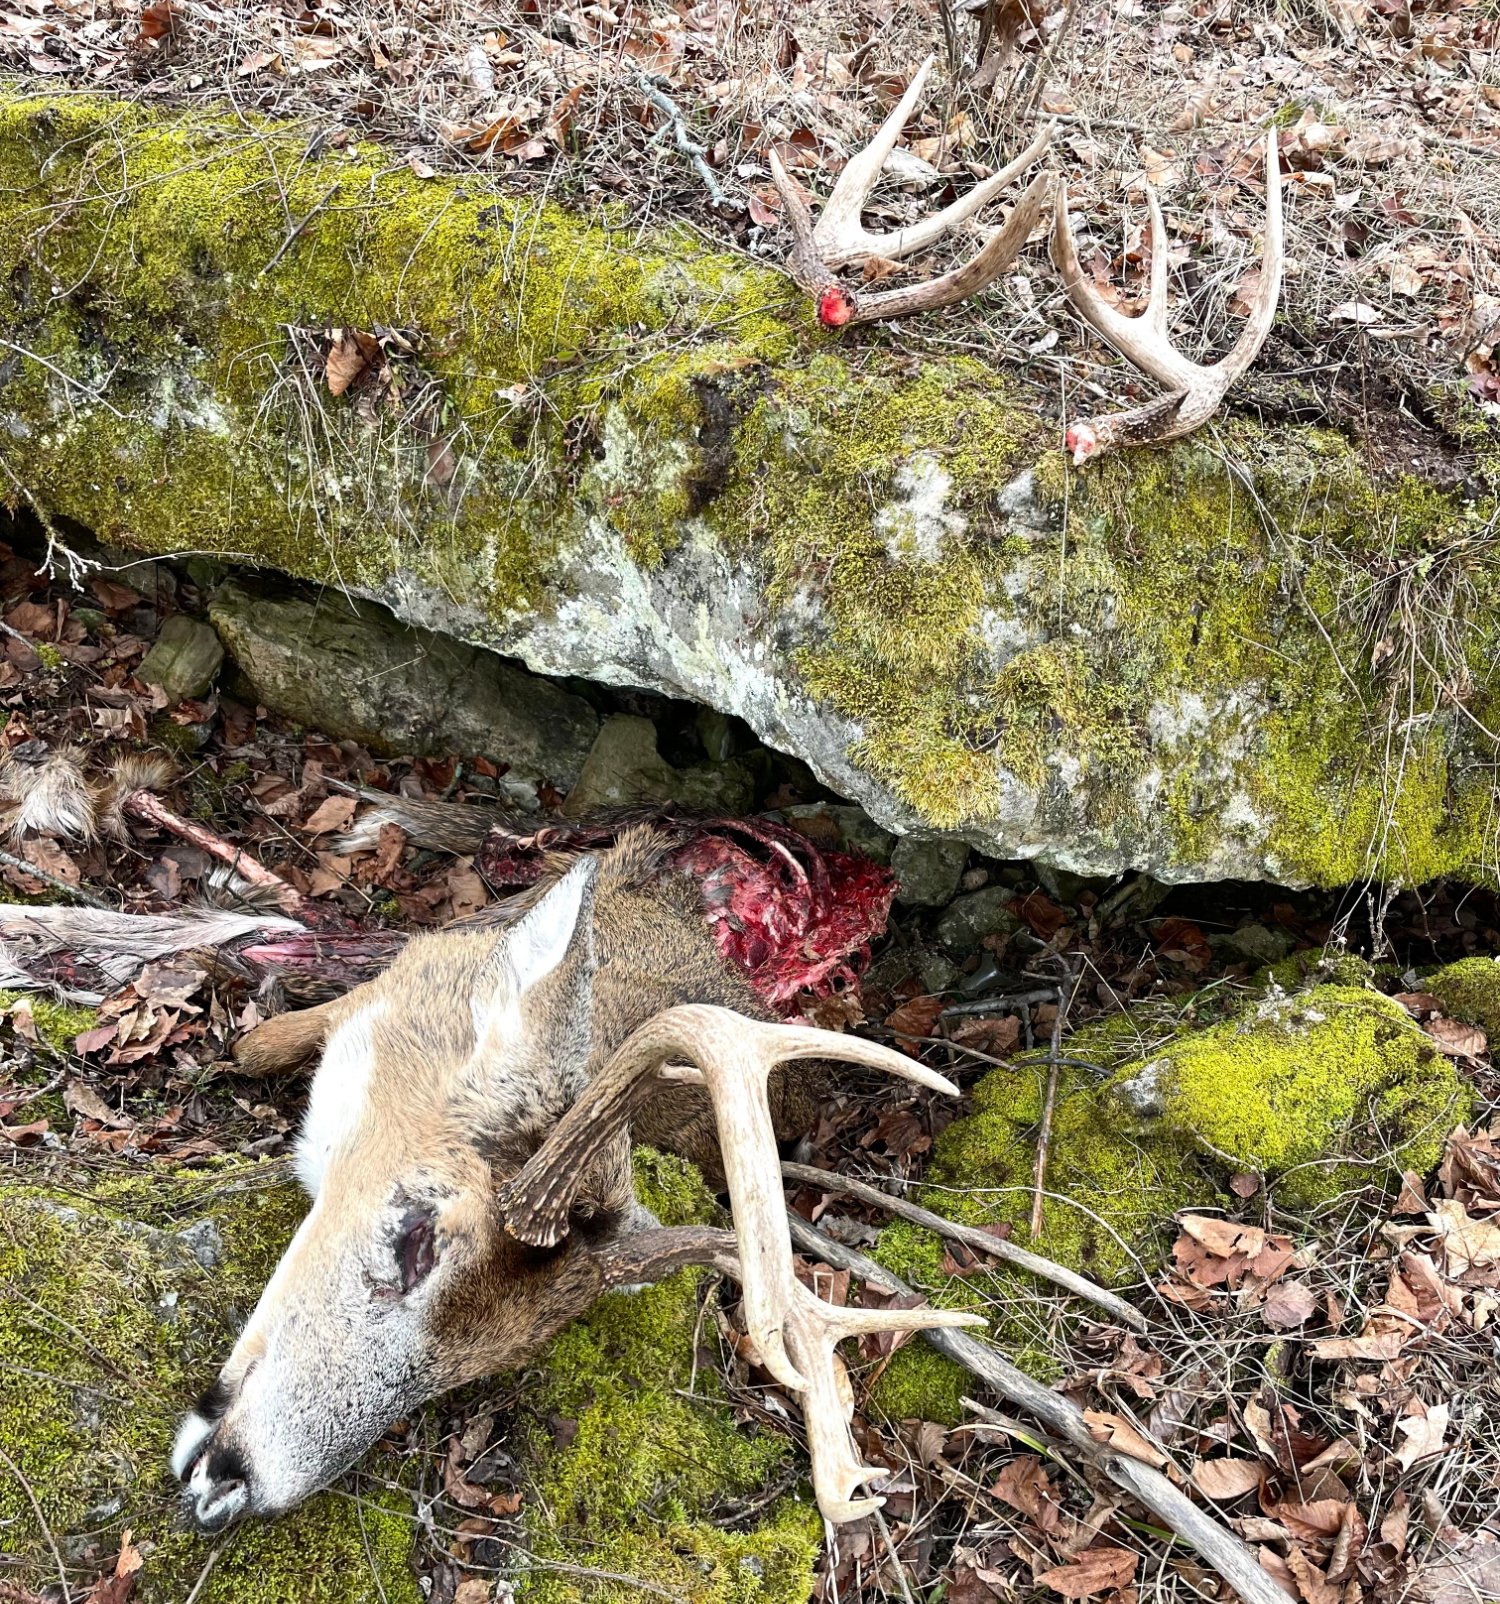 A dead whitetail buck with a set of shed antlers.